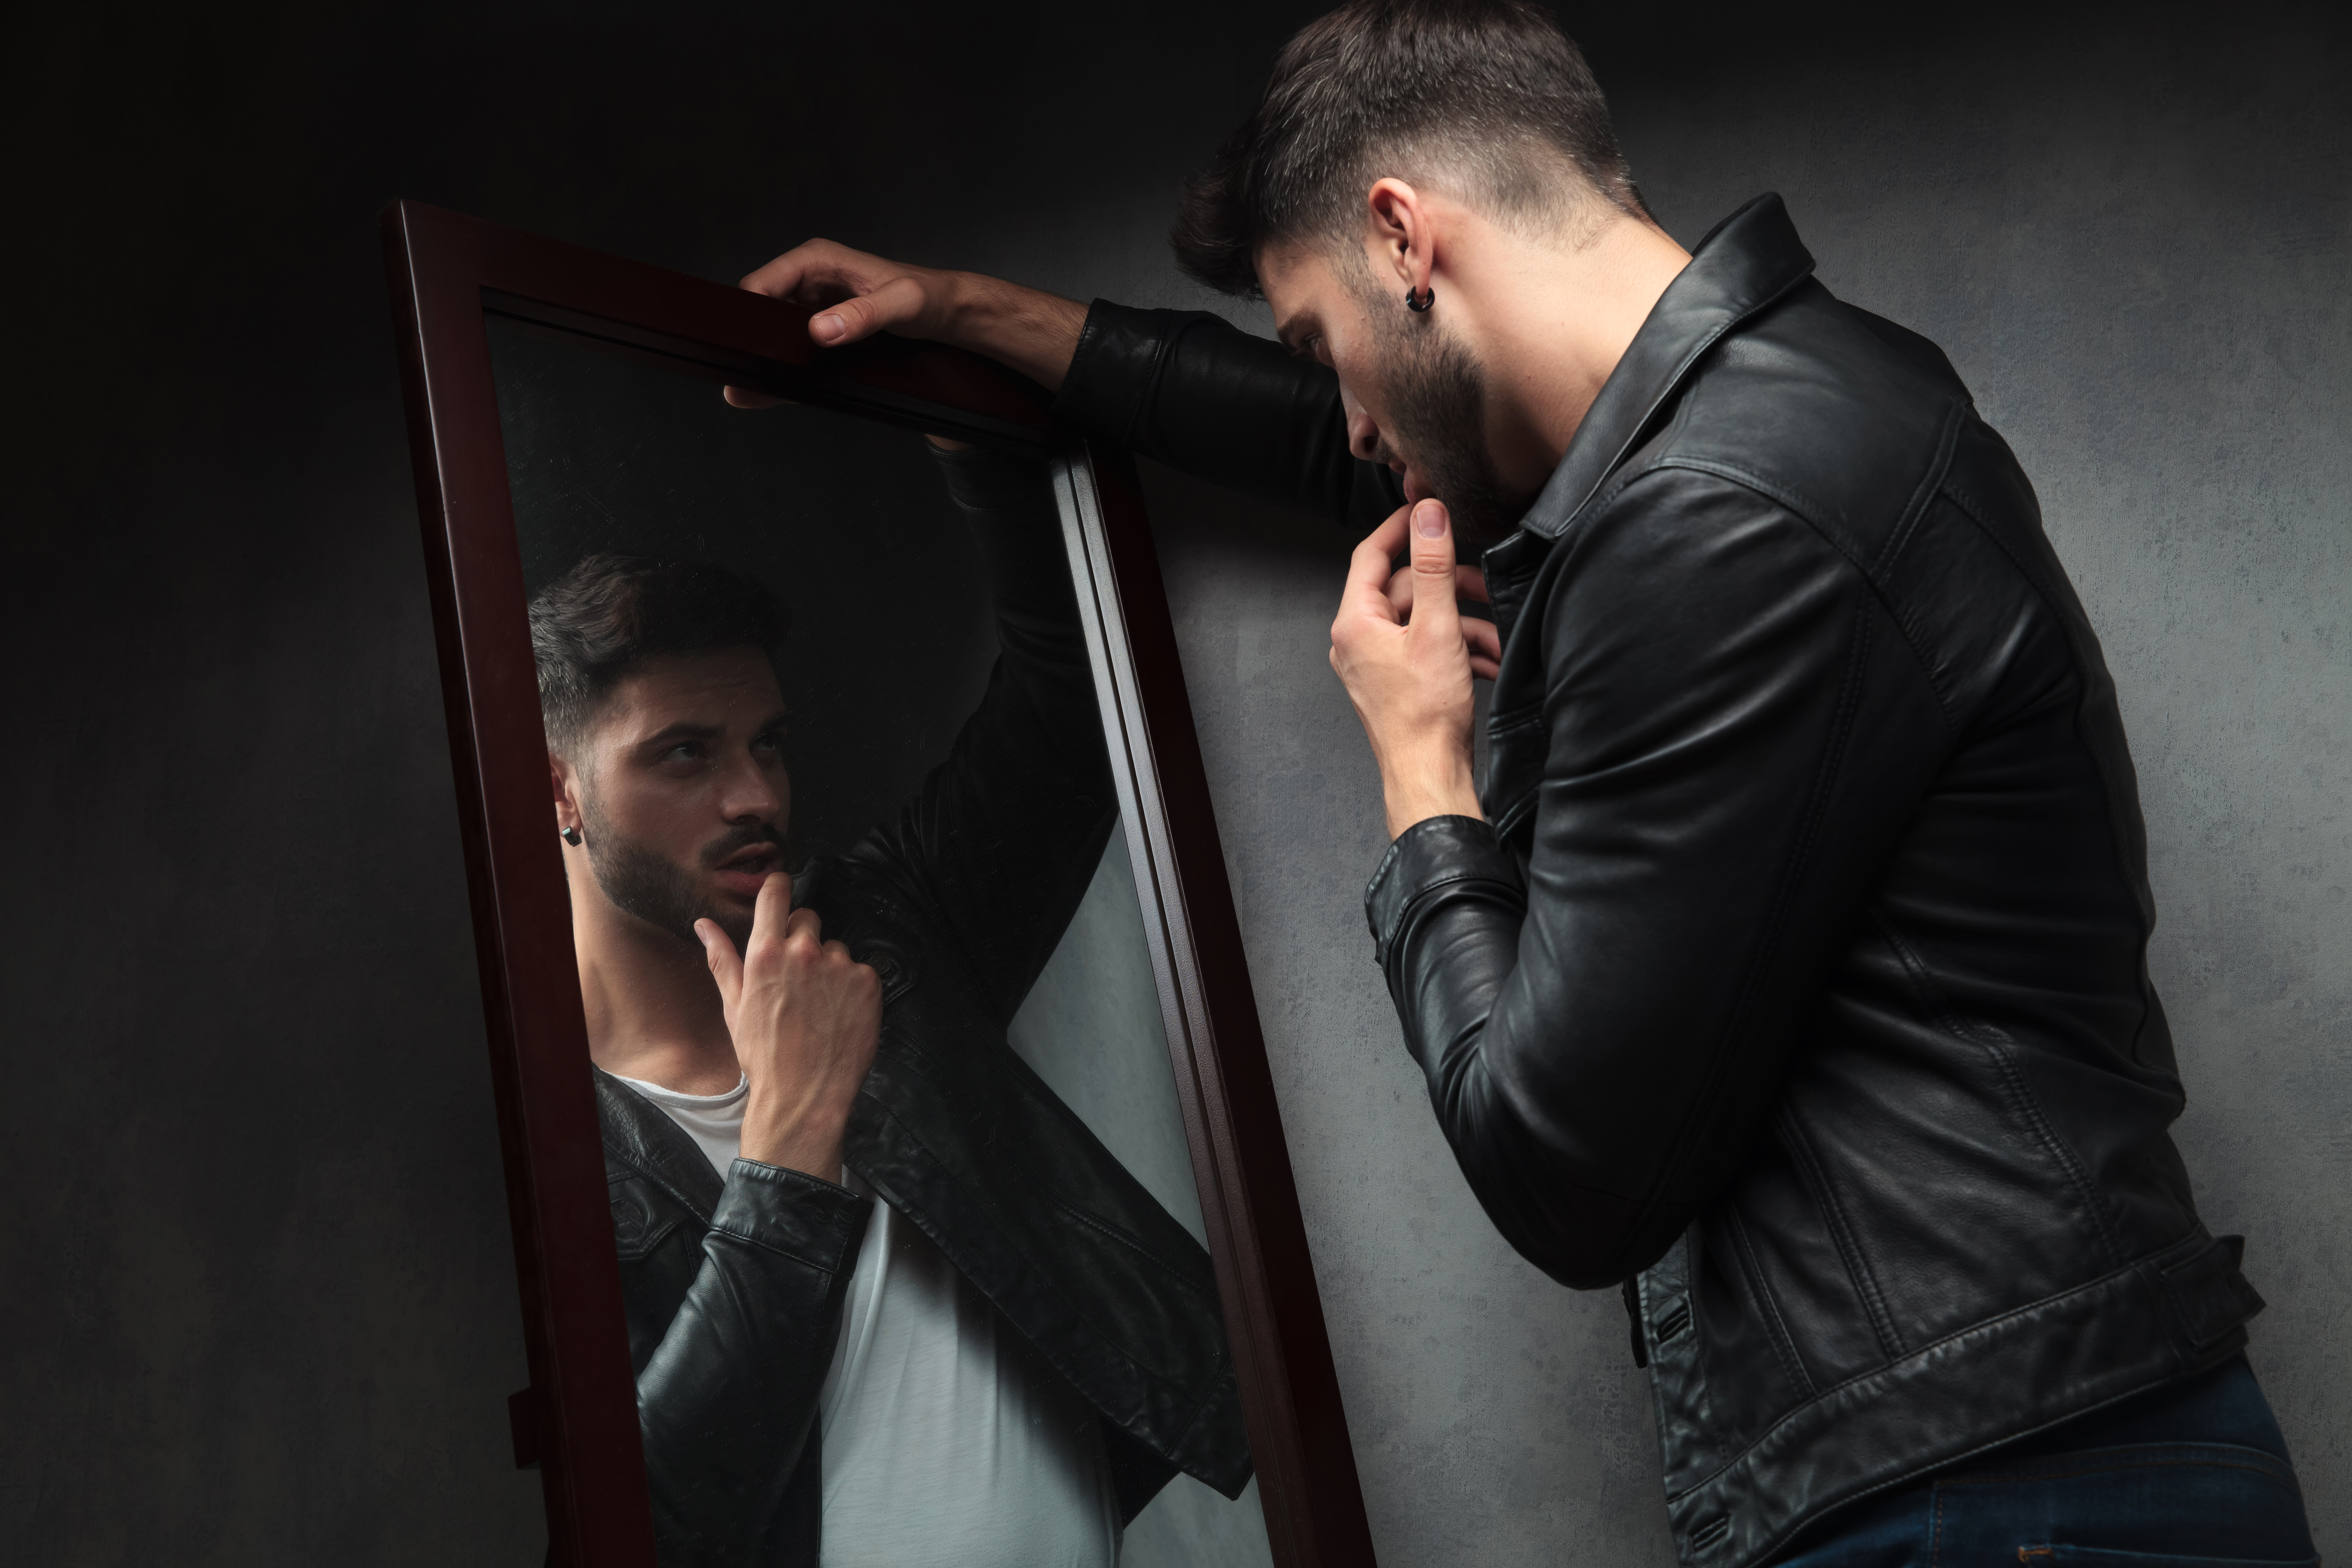 Narcissistic man admiring himself in the mirror